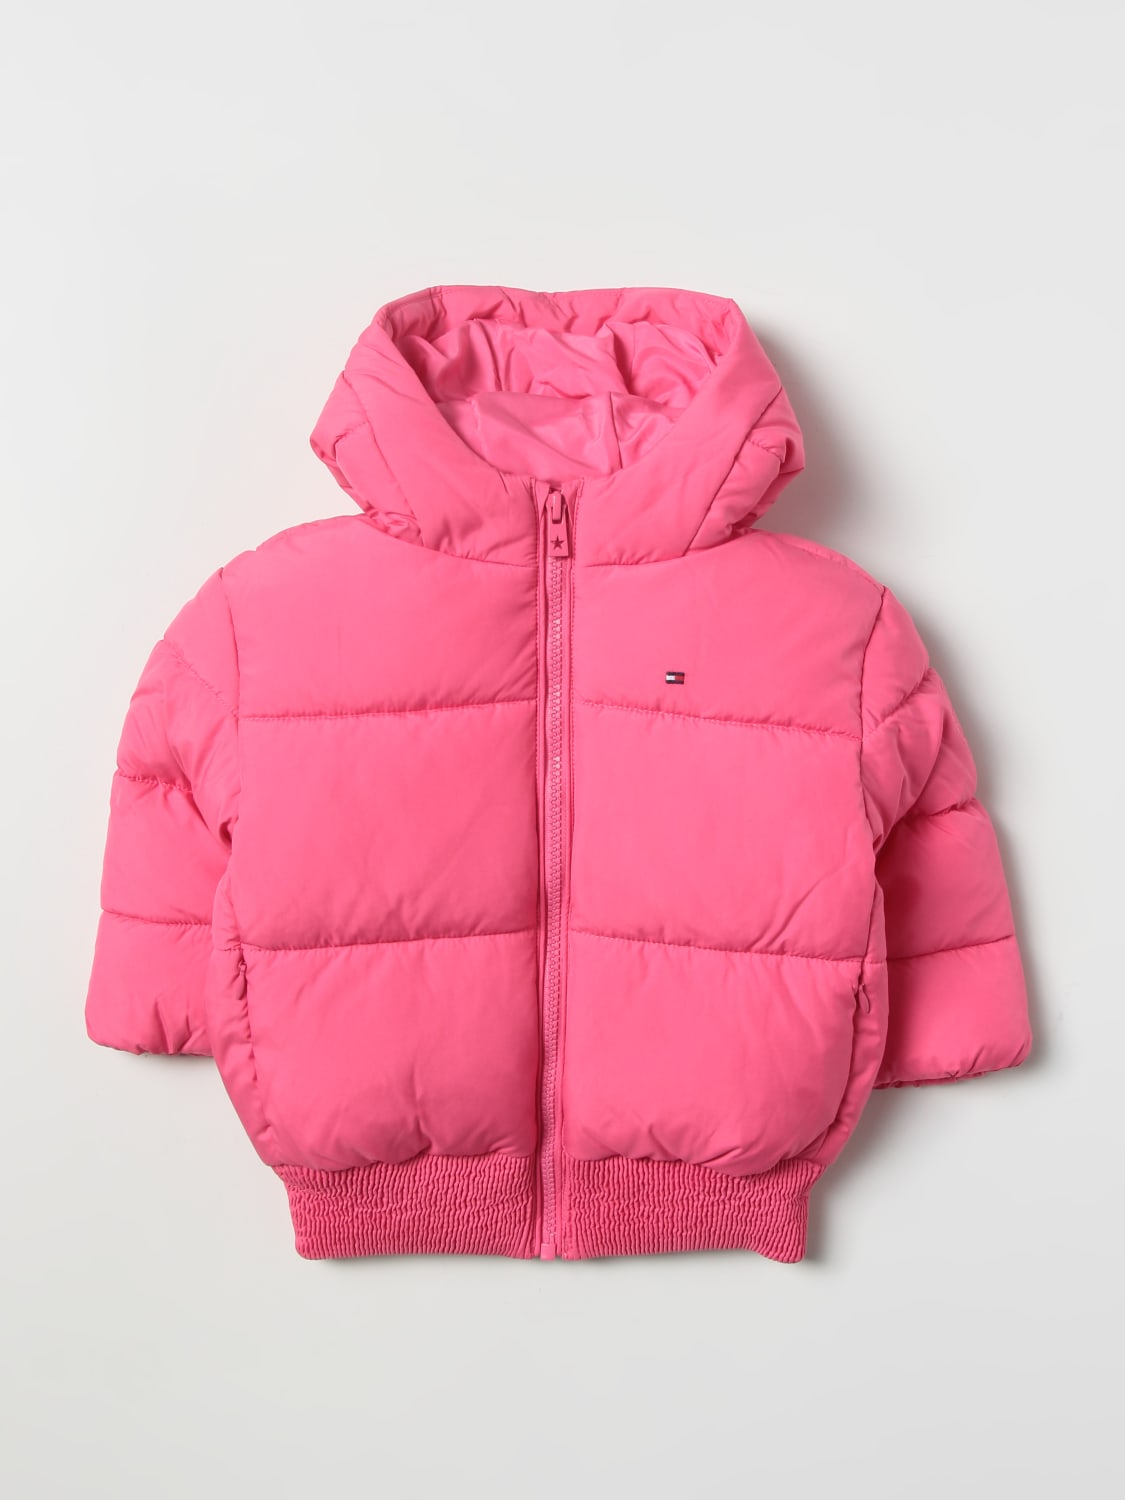 mobil vask mini Tommy Hilfiger Outlet: down jacket with hood - Pink | Tommy Hilfiger jacket  KG0KG06689 online at GIGLIO.COM